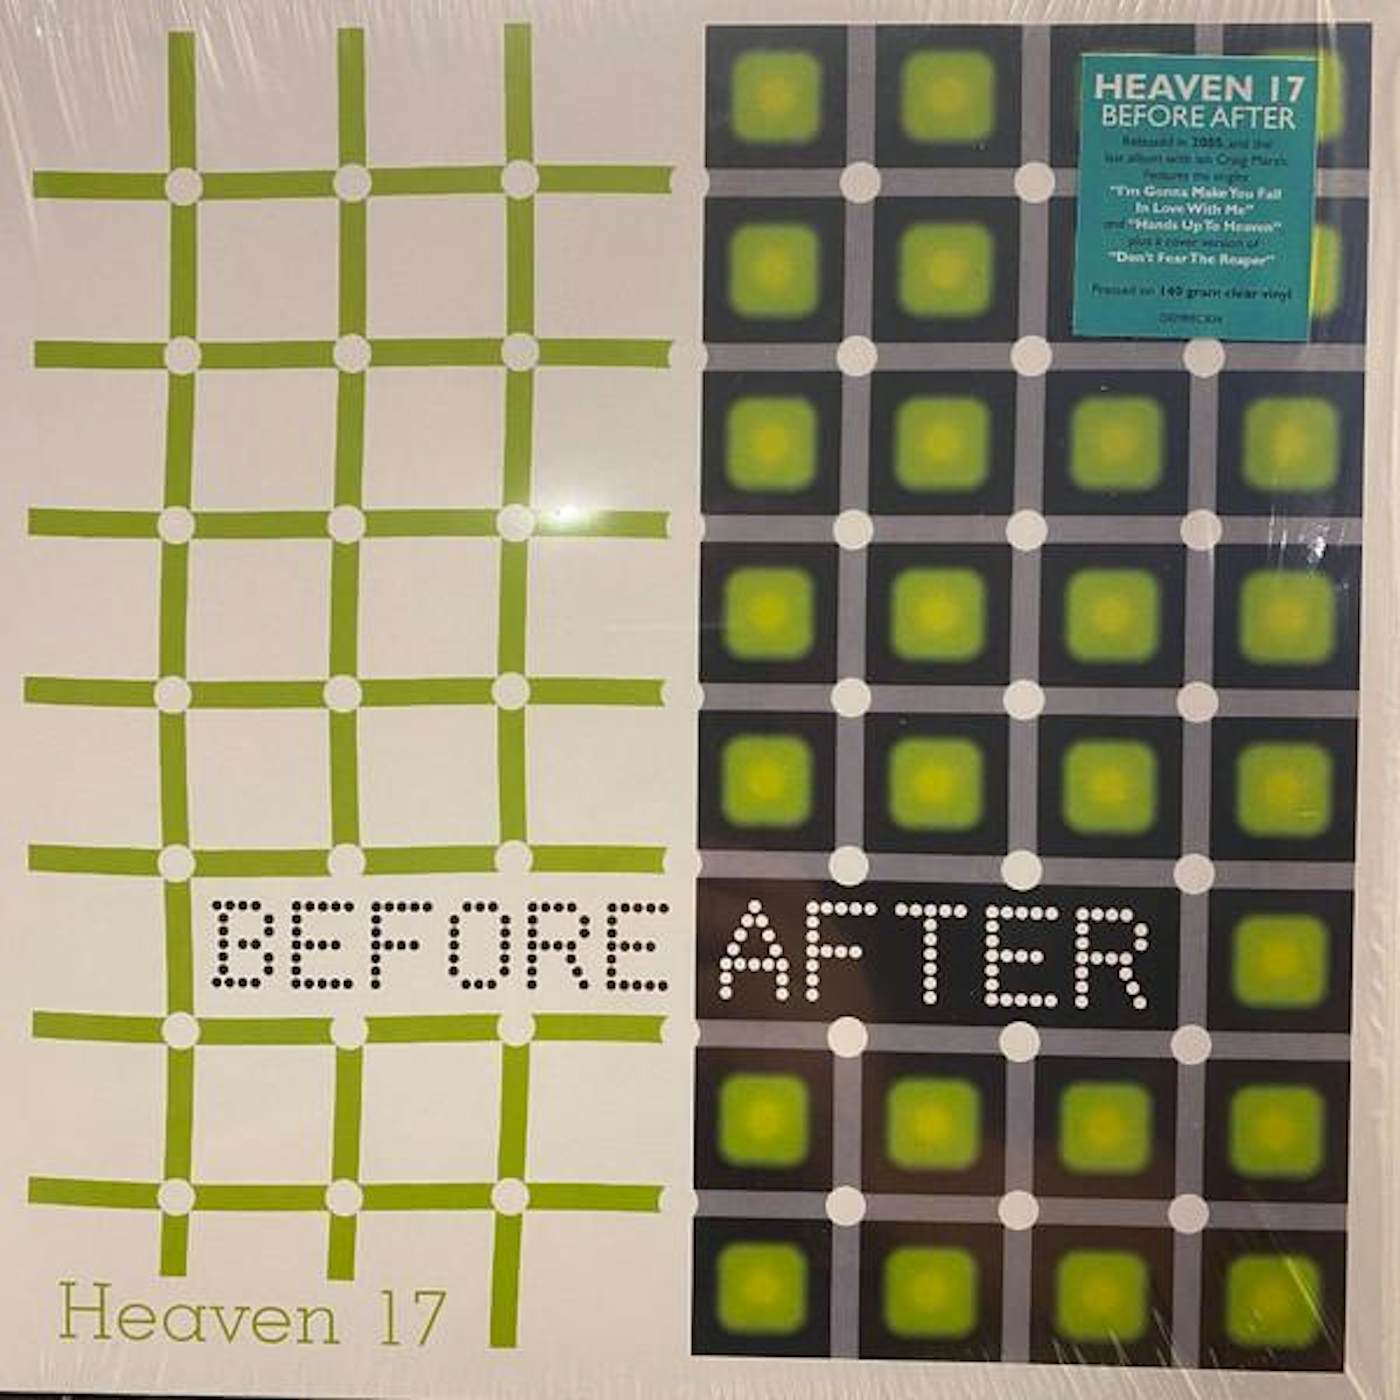 Heaven 17 BEFORE AFTER (140G/CLEAR VINYL) Vinyl Record